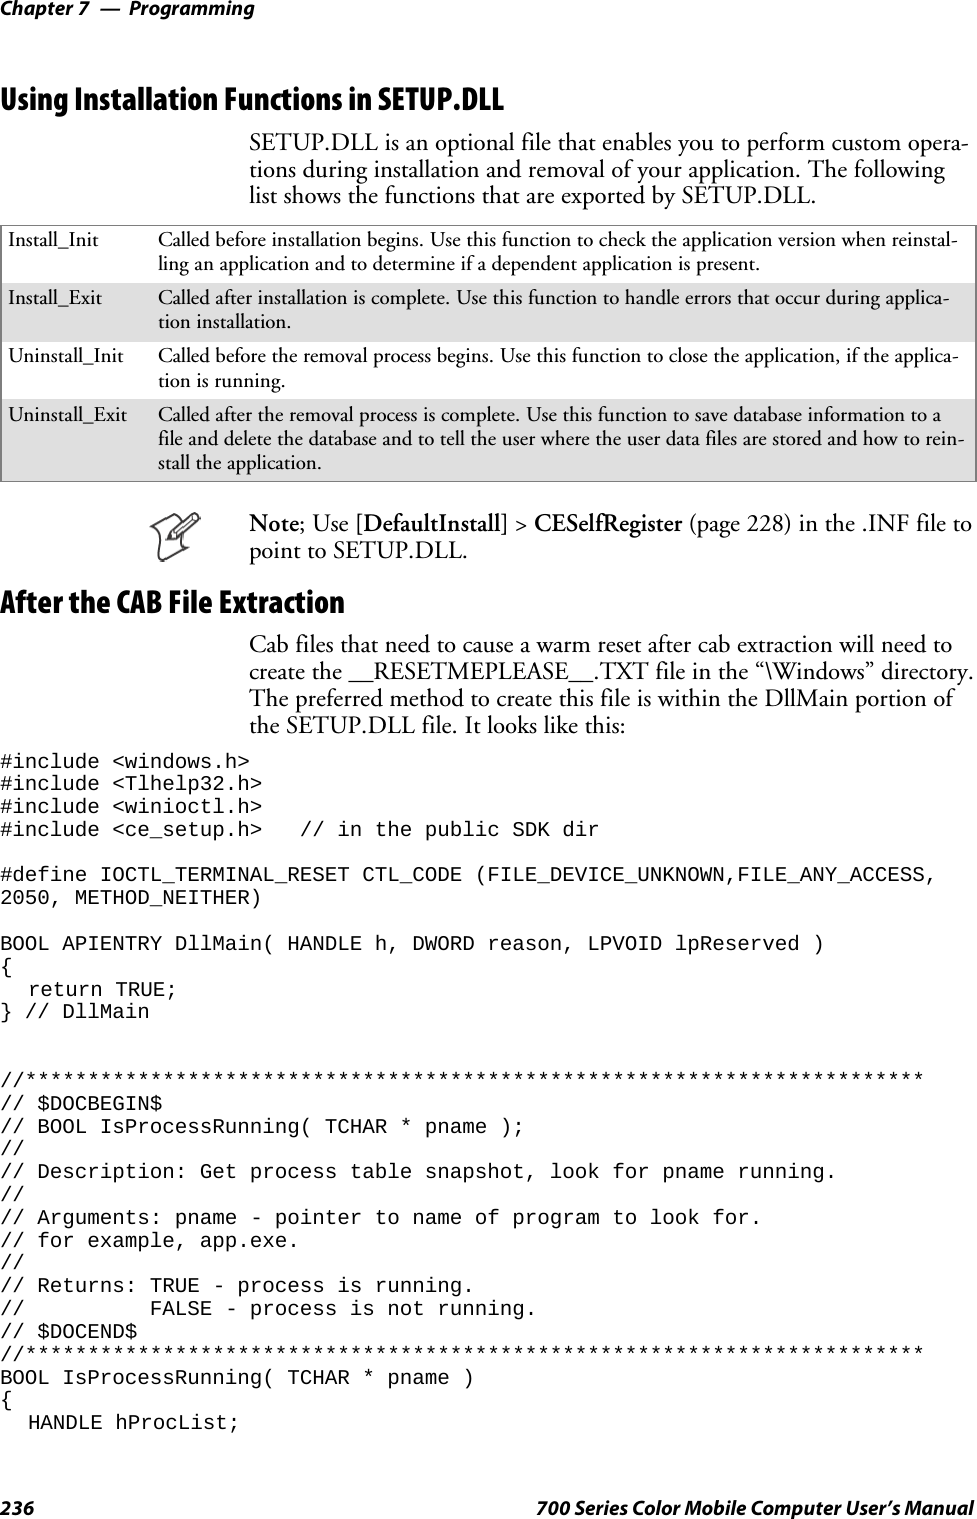 ProgrammingChapter —7236 700 Series Color Mobile Computer User’s ManualUsing Installation Functions in SETUP.DLLSETUP.DLL is an optional file that enables you to perform custom opera-tions during installation and removal of your application. The followinglist shows the functions that are exported by SETUP.DLL.Install_Init Called before installation begins. Use this function to check the application version when reinstal-ling an application and to determine if a dependent application is present.Install_Exit Called after installation is complete. Use this function to handle errors that occur during applica-tion installation.Uninstall_Init Called before the removal process begins. Use this function to close the application, if the applica-tion is running.Uninstall_Exit Called after the removal process is complete. Use this function to save database information to afile and delete the database and to tell the user where the user data files are stored and how to rein-stall the application.Note;Use[DefaultInstall] &gt;CESelfRegister (page 228) in the .INF file topoint to SETUP.DLL.After the CAB File ExtractionCab files that need to cause a warm reset after cab extraction will need tocreate the __RESETMEPLEASE__.TXT file in the “\Windows” directory.The preferred method to create this file is within the DllMain portion oftheSETUP.DLLfile.Itlookslikethis:#include &lt;windows.h&gt;#include &lt;Tlhelp32.h&gt;#include &lt;winioctl.h&gt;#include &lt;ce_setup.h&gt; // in the public SDK dir#define IOCTL_TERMINAL_RESET CTL_CODE (FILE_DEVICE_UNKNOWN,FILE_ANY_ACCESS,2050, METHOD_NEITHER)BOOL APIENTRY DllMain( HANDLE h, DWORD reason, LPVOID lpReserved ){return TRUE;} // DllMain//************************************************************************// $DOCBEGIN$// BOOL IsProcessRunning( TCHAR * pname );//// Description: Get process table snapshot, look for pname running.//// Arguments: pname - pointer to name of program to look for.// for example, app.exe.//// Returns: TRUE - process is running.// FALSE - process is not running.// $DOCEND$//************************************************************************BOOL IsProcessRunning( TCHAR * pname ){HANDLE hProcList;